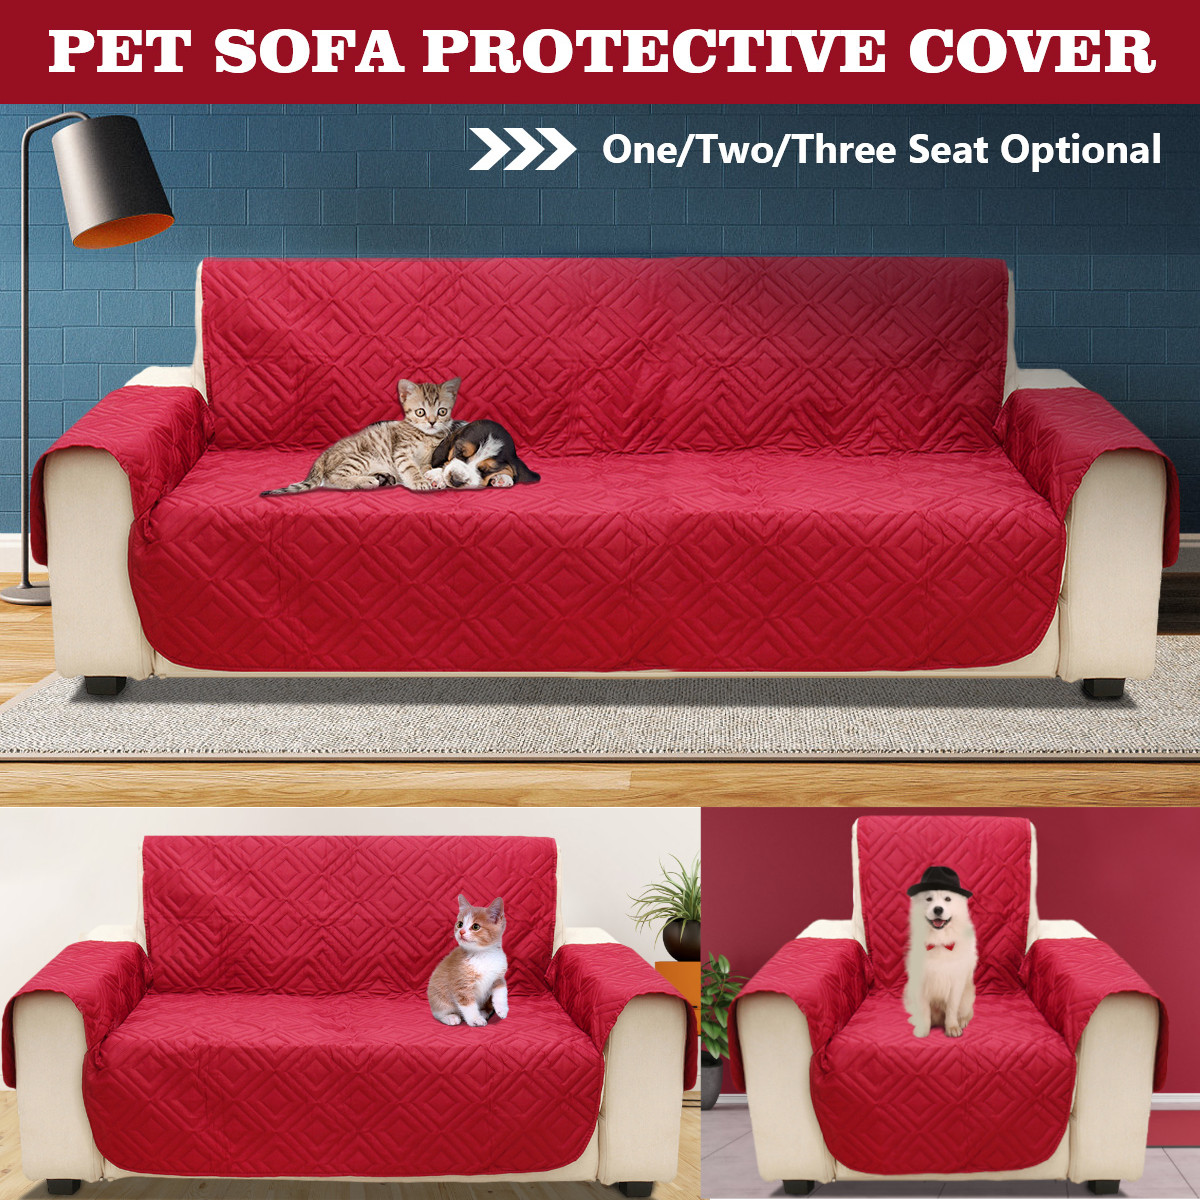 Fuchsia-123-Seat-Pet-Sofa-Couch-Protector-Cover-Removable-Waterproof-Anti-slip-Mat-1495567-1